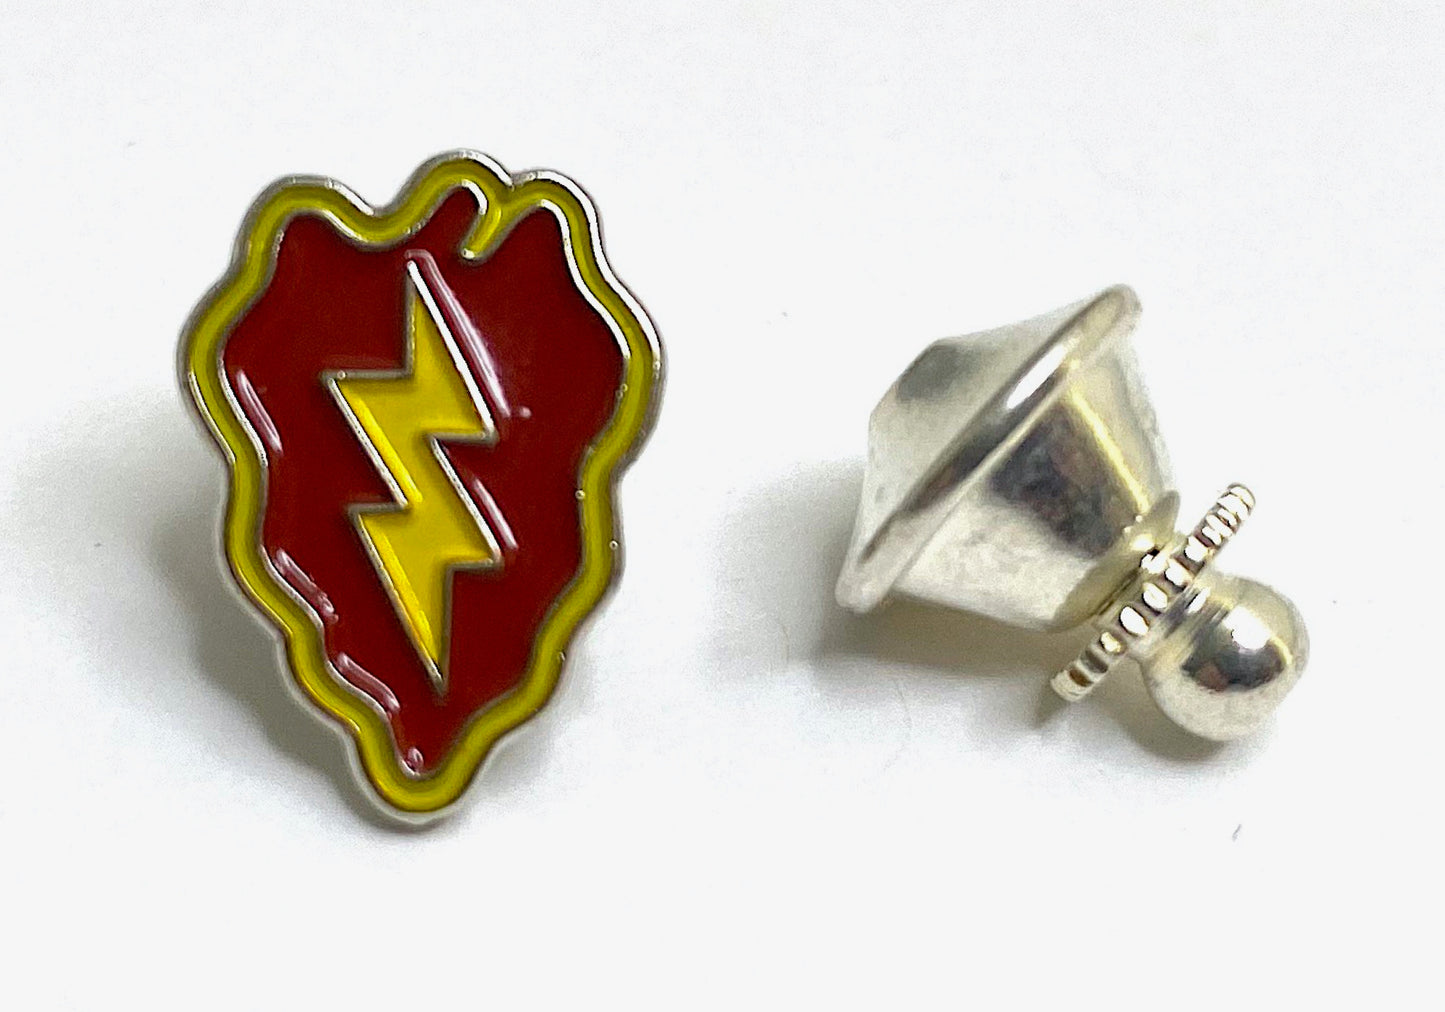 25th Infantry Division Lapel Pin